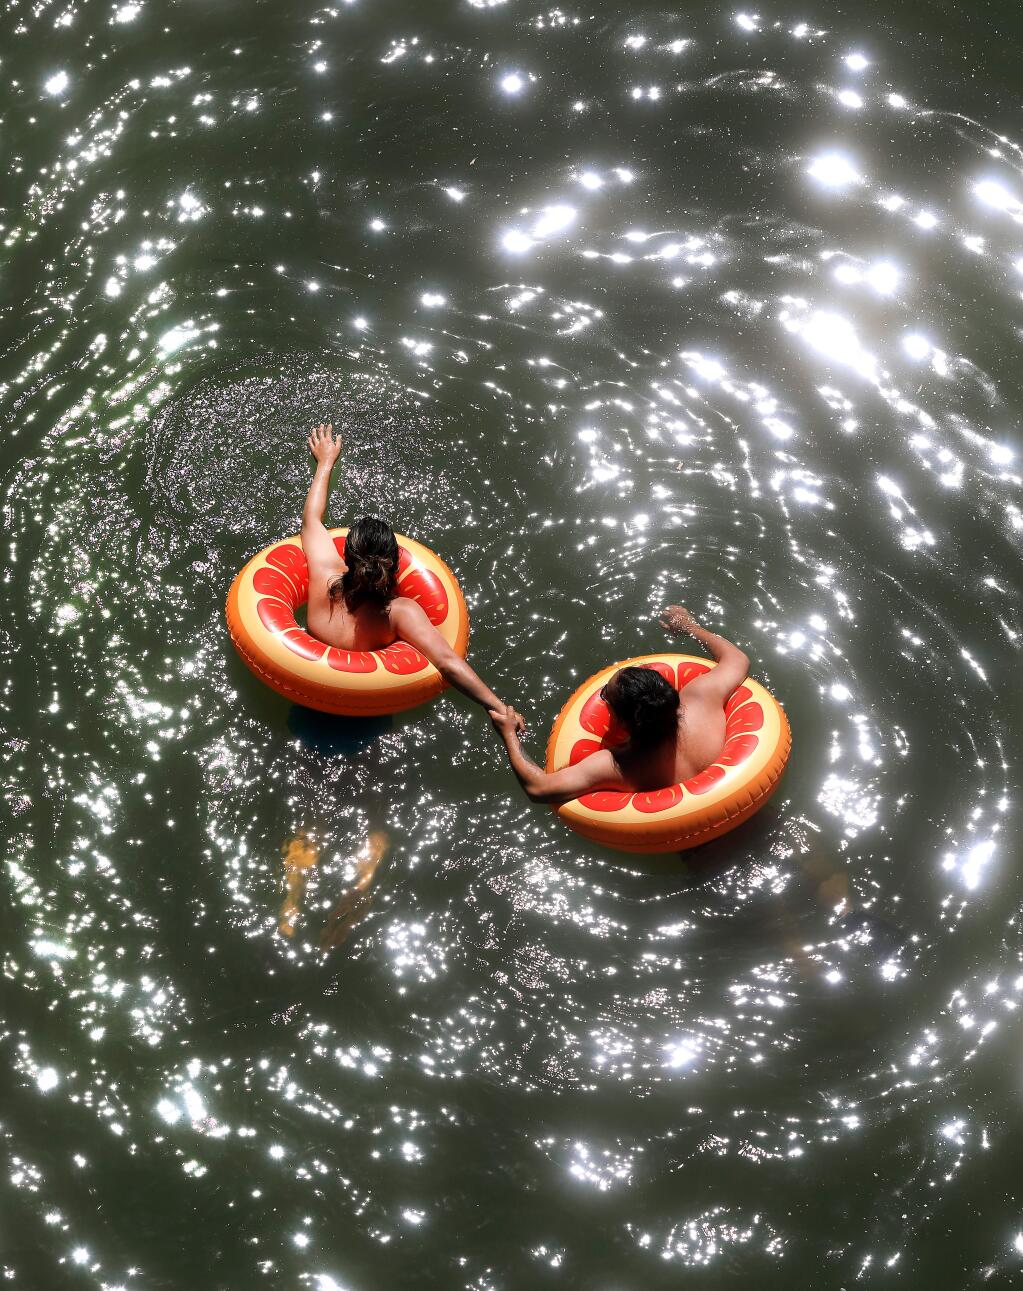 Oakland residents Jude Bermeo, left, and Christine Olivo float down the Russian River in Monte Rio on Tuesday, June 4, 2019 in Monte Rio. Click through for ideas on ways to be the heat. (KENT PORTER/ PD)